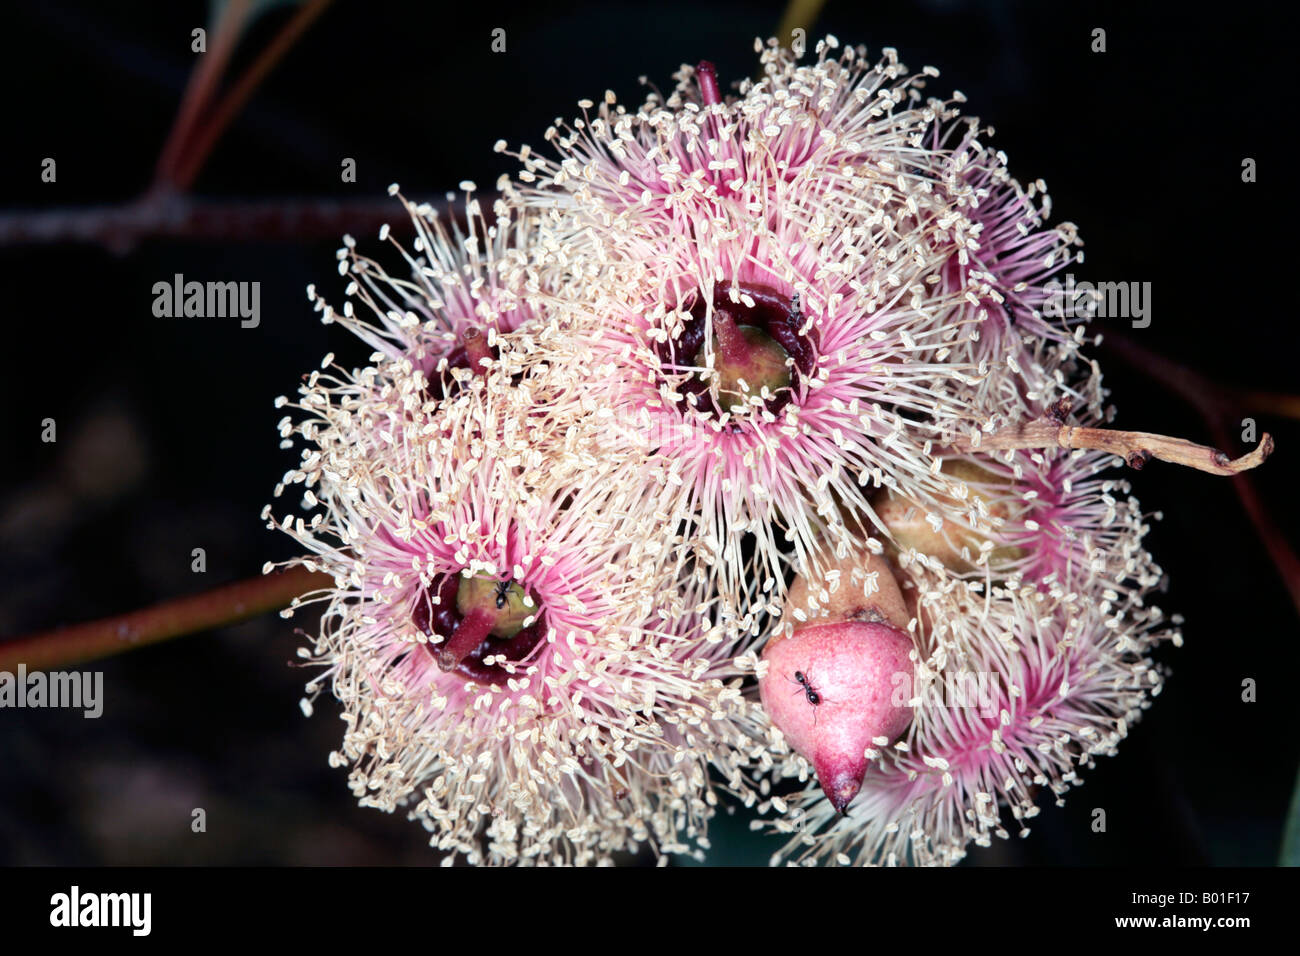 Red-throated Bloodwood flowers and buds with Black Ants-Eucalyptus/Corymbia rhodops-Family Myrtaceae Stock Photo